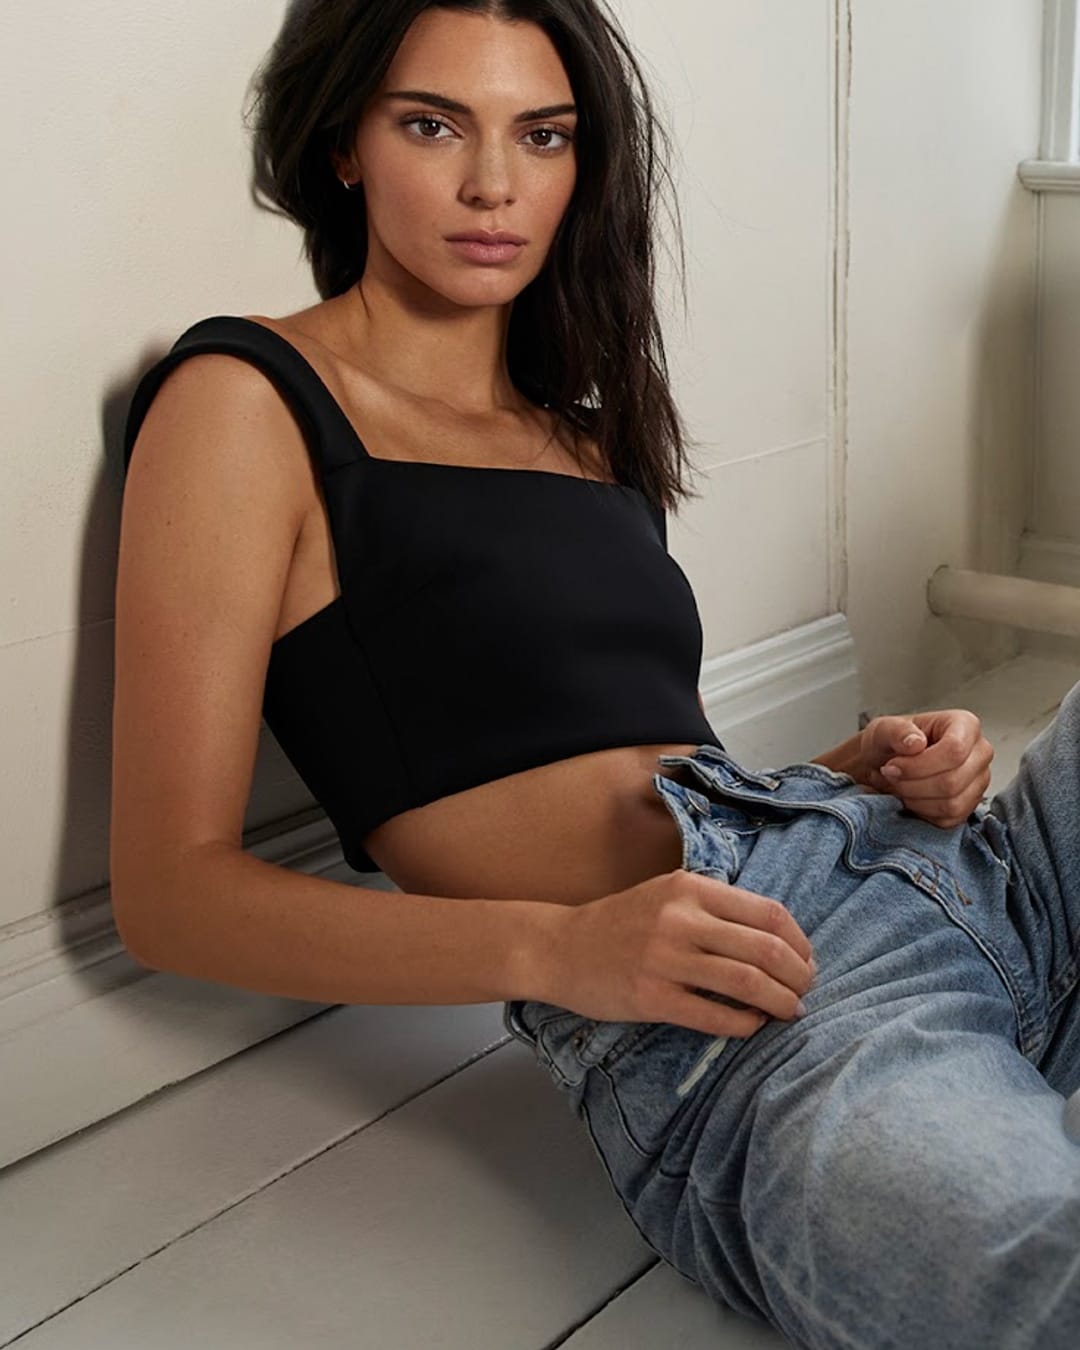 Kendall Jenner wearing a black crop top and mid-blue washed Ksubi jeans sitting on the floor of a white room, leaning back on the wall. The floor is white painted floorboards. A white radiator with peeling paint and a window with a white gauze curtain is in the background.